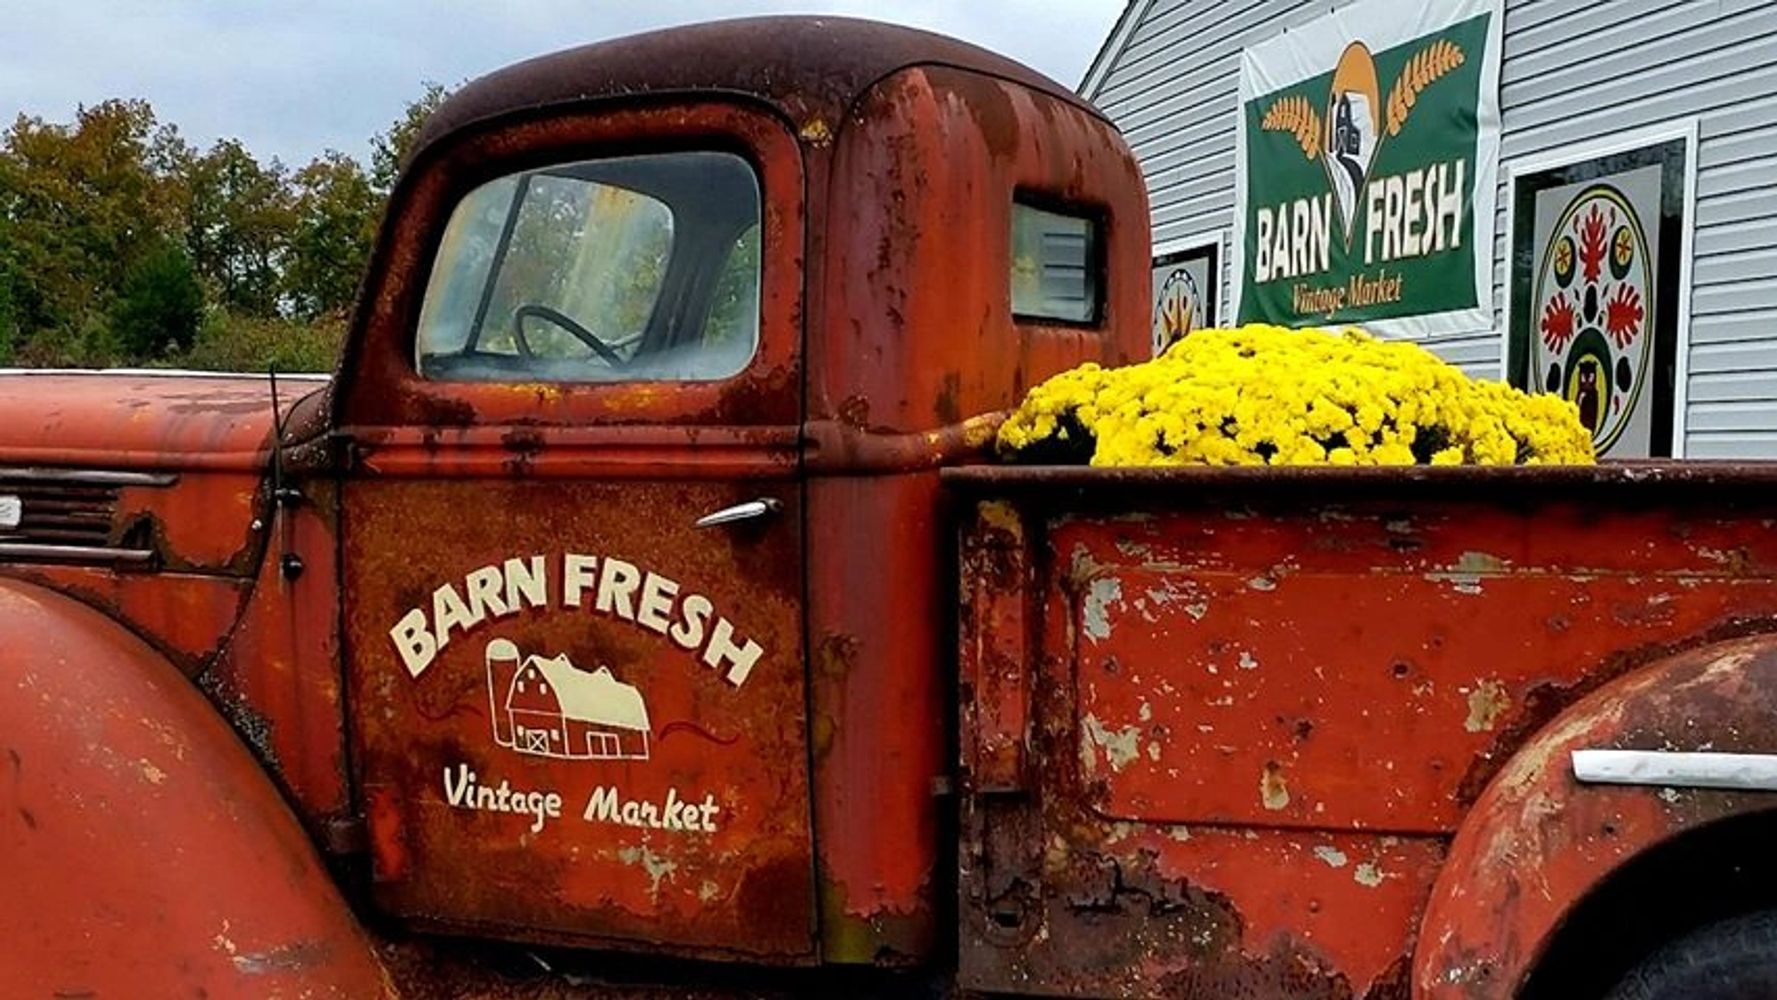 1941 Ford Pick up truck out in front  of Barn Fresh Vintage Market. 